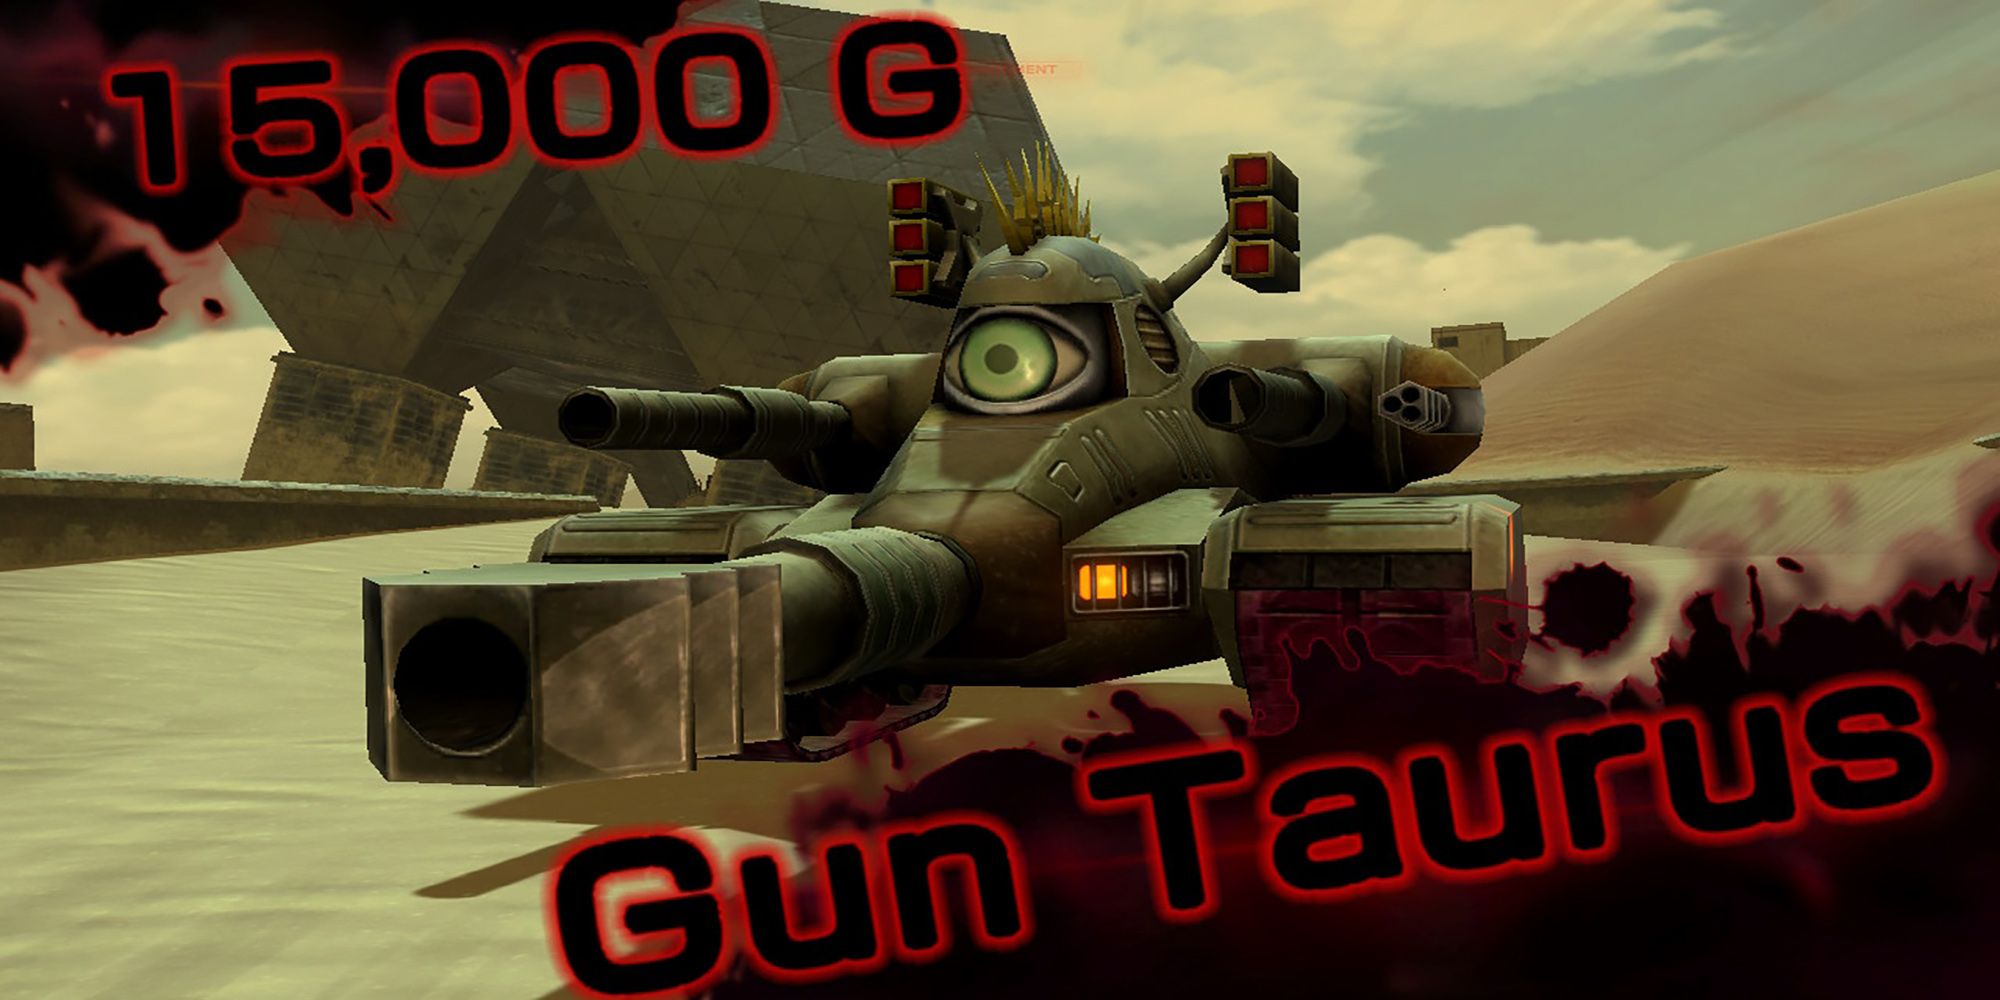 Gun Taurus is encountered for the first time in Ariake West Canal in Metal Max Xeno Reborn.